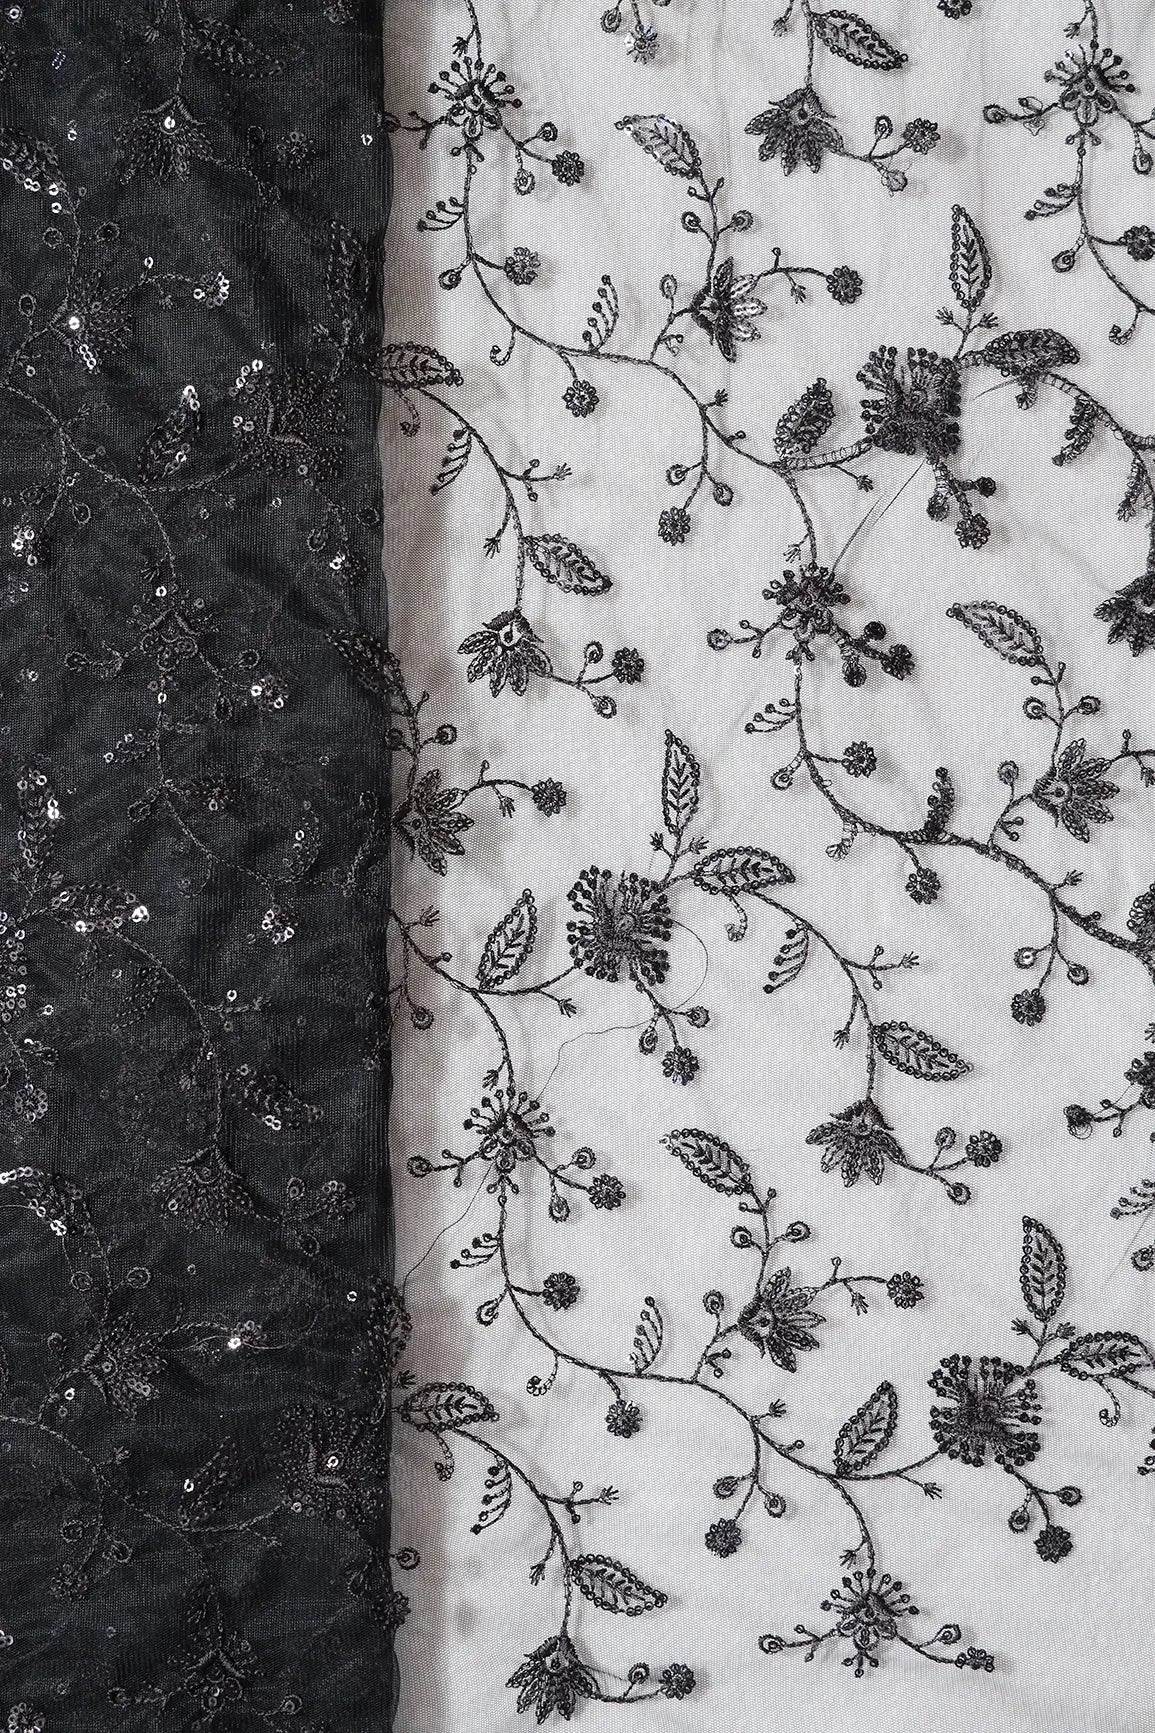 Black Thread With Black Sequins Floral Embroidery On Black Soft Net Fabric - doeraa